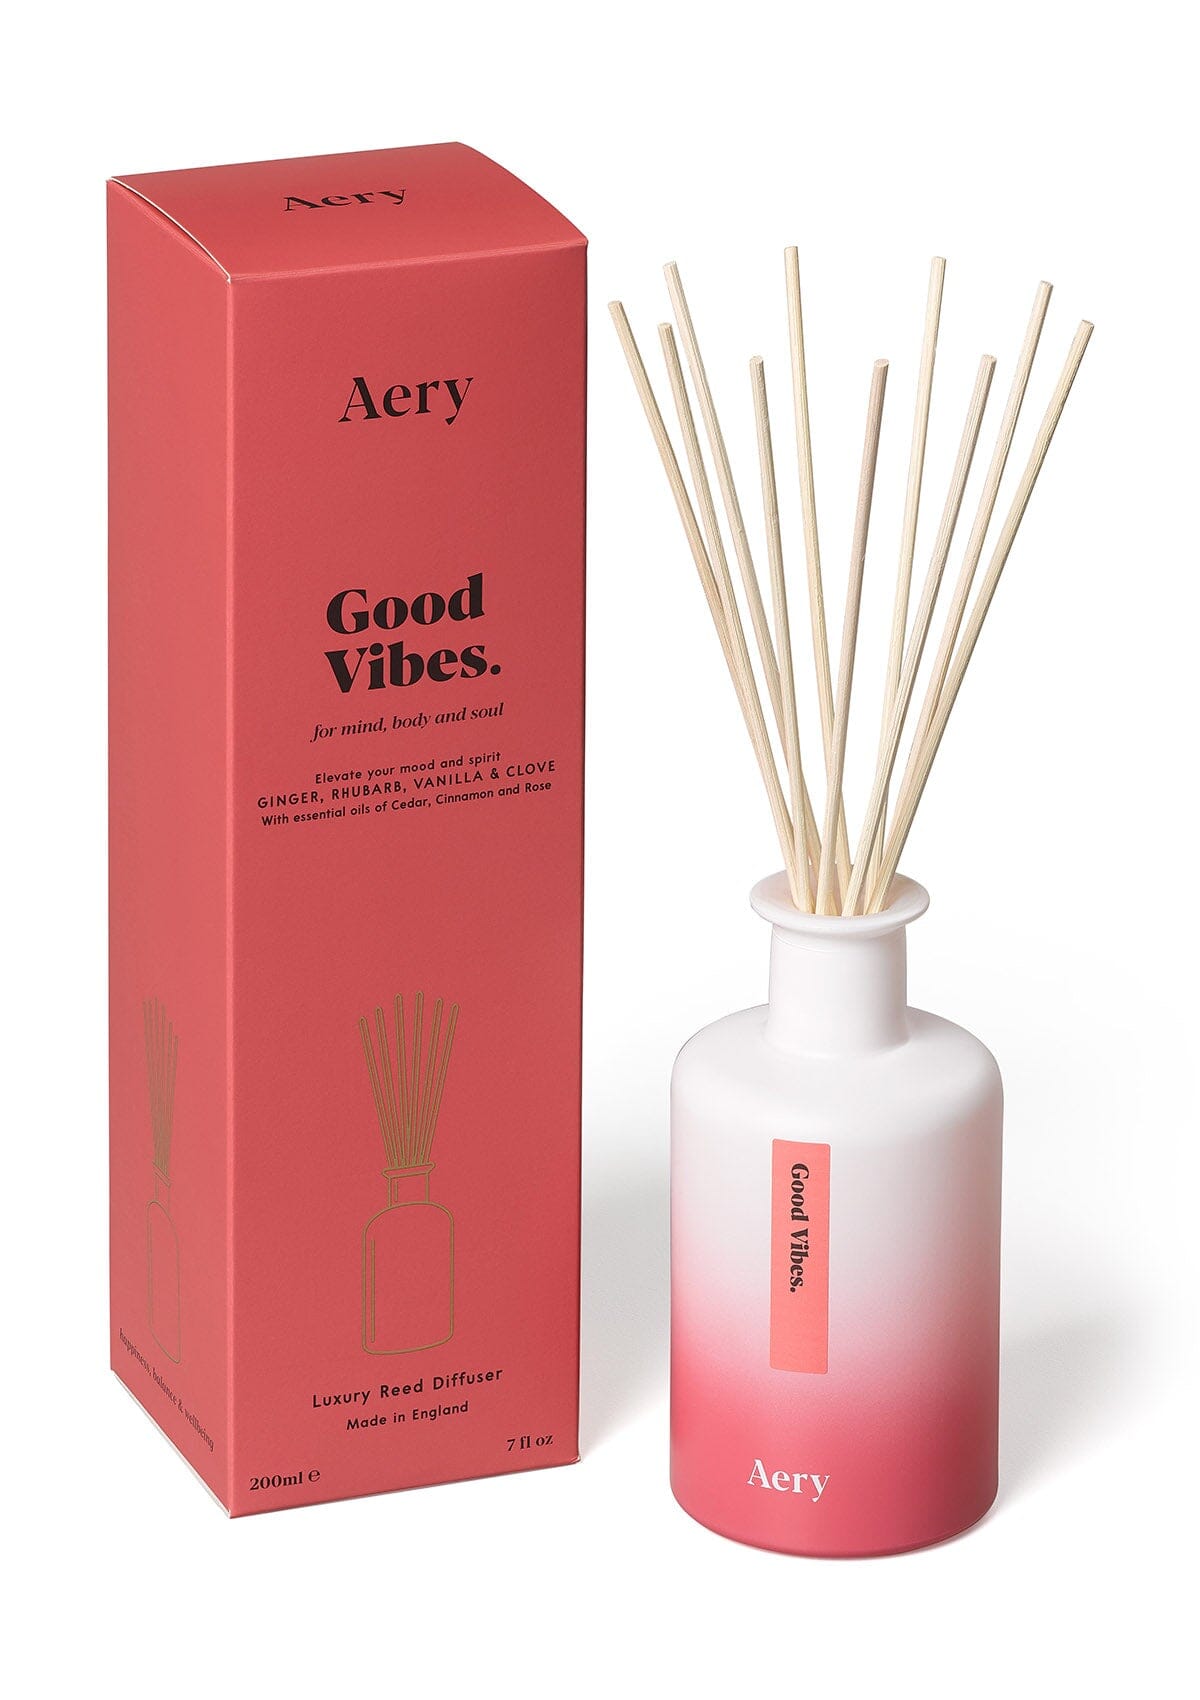 Deep pink Good vibes diffuser with product packaging by Aery 